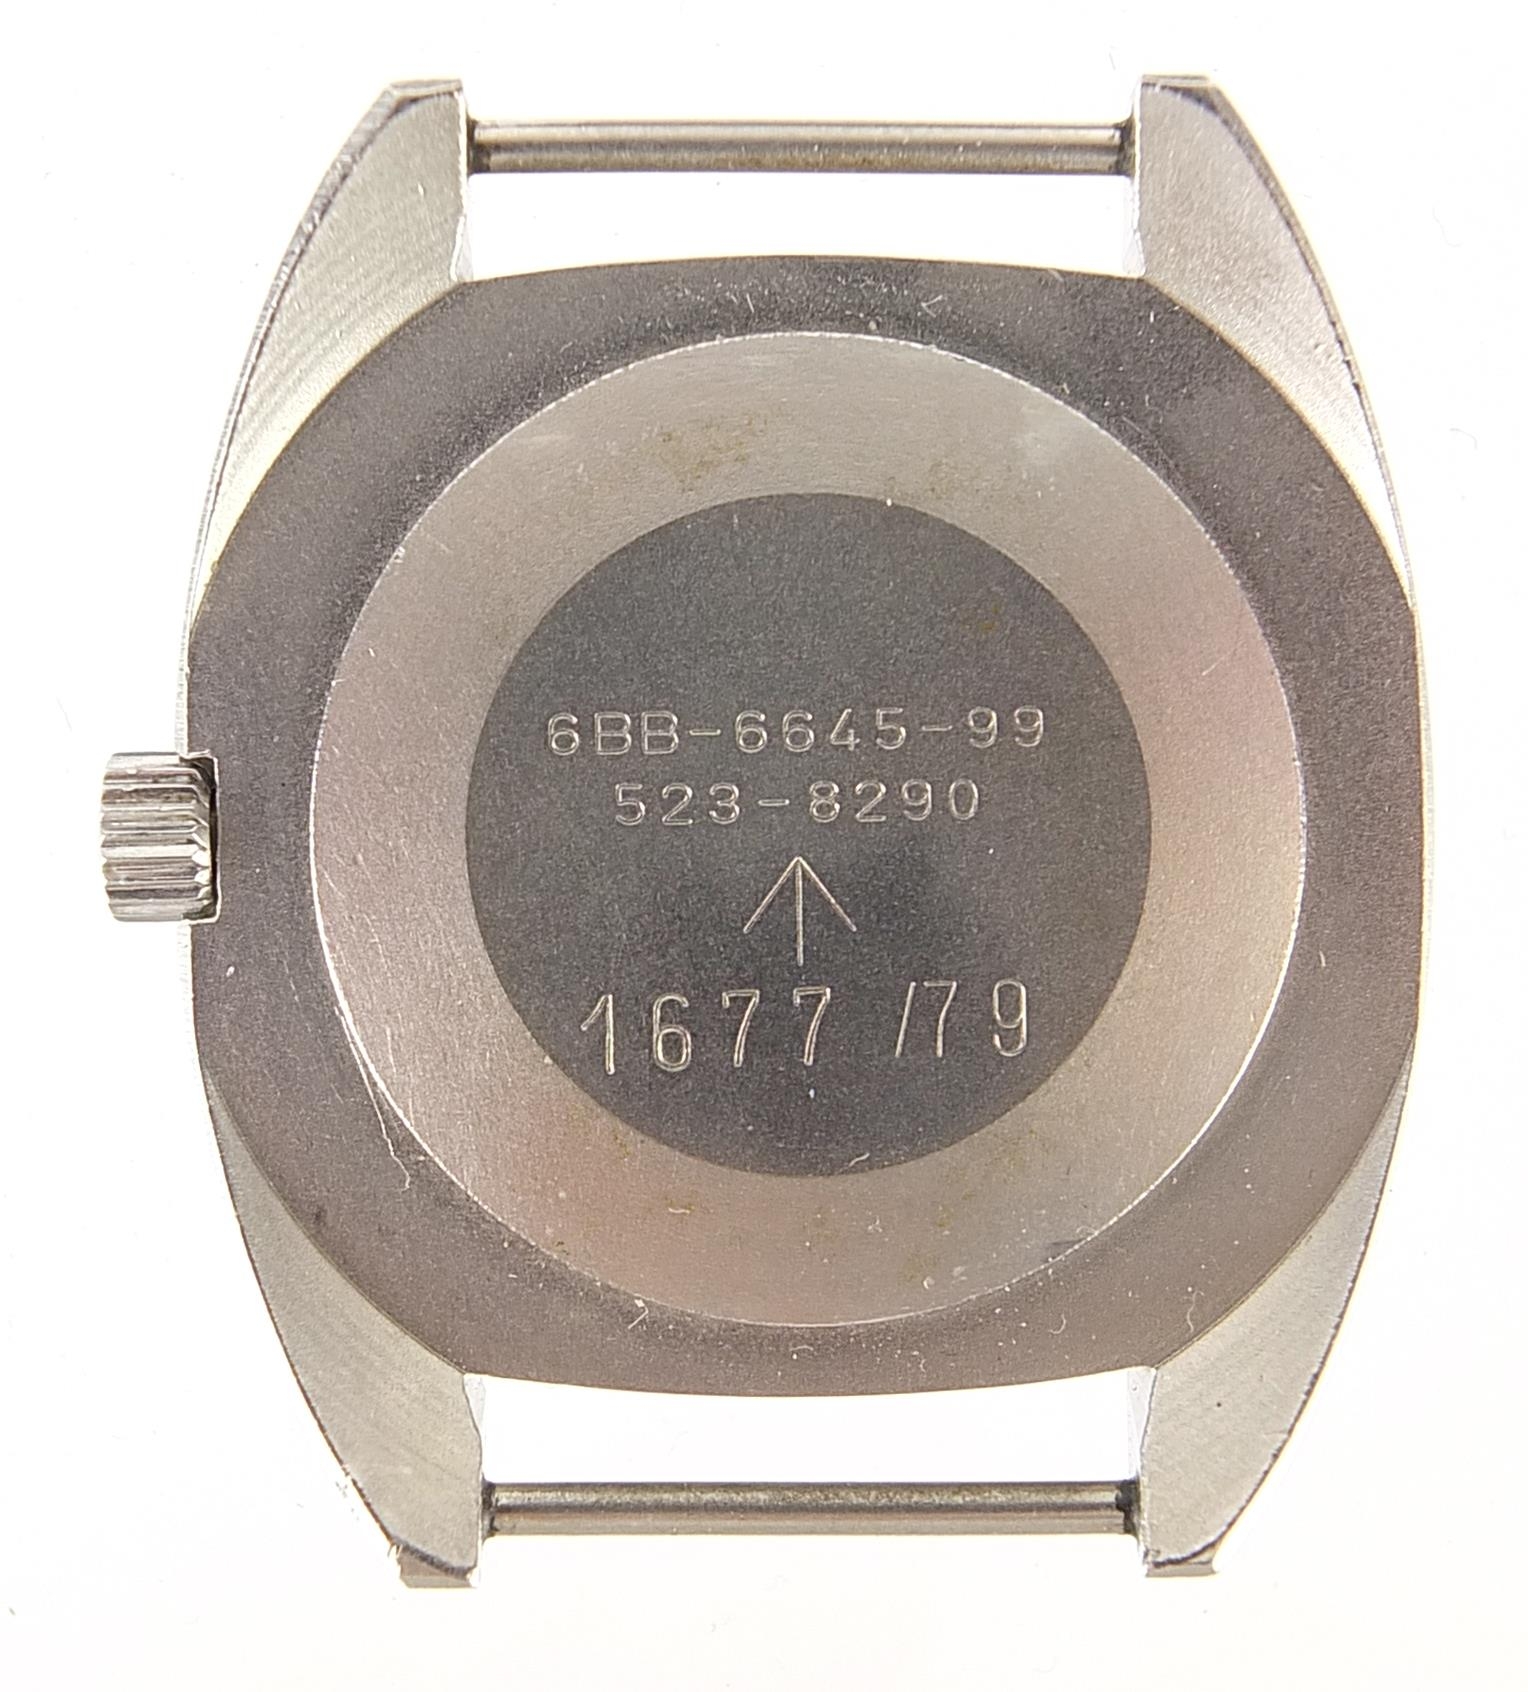 C W C, gentlemen's military issue wristwatch the case engraved 6BB-6645-99 523-6290 1677/79, the - Image 3 of 4